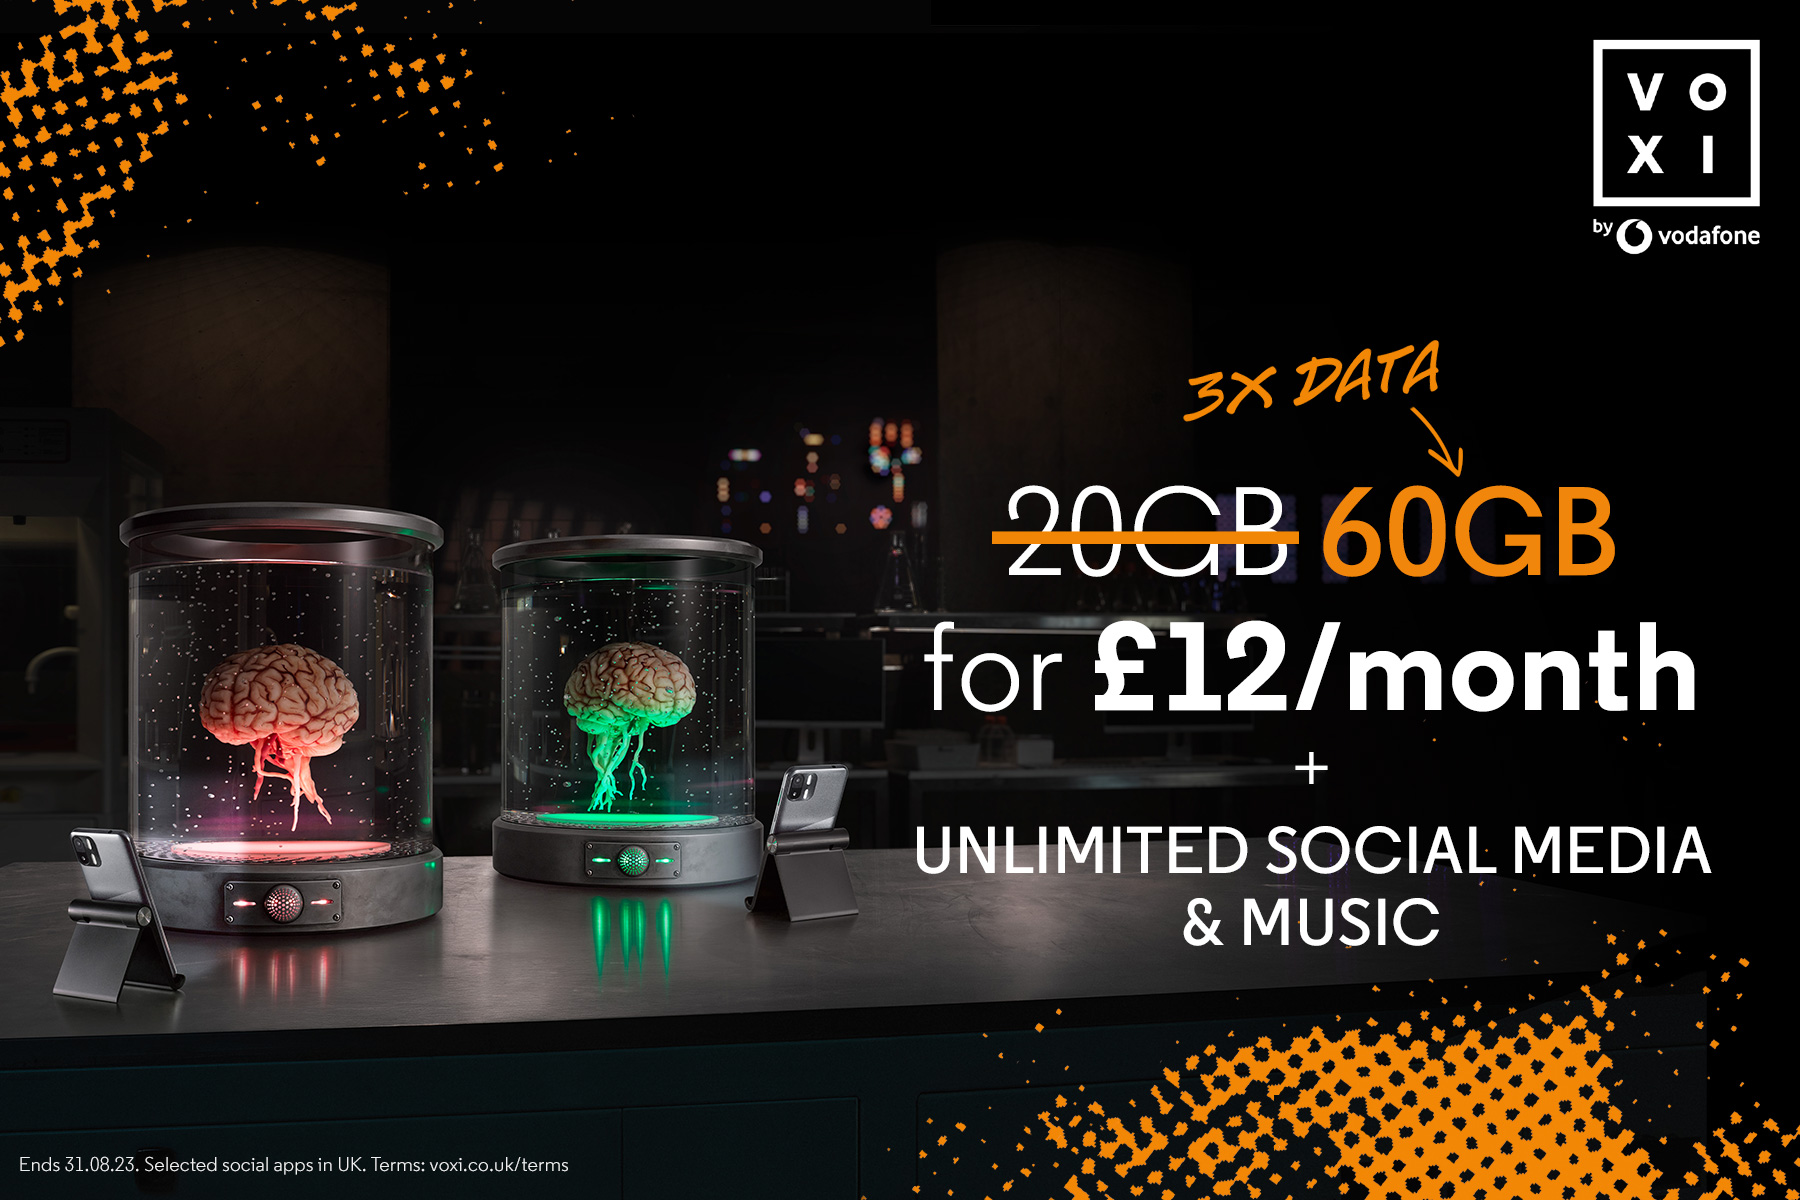 image promoting the addition of Unlimited Music to all VOXI plans costing £12 or more